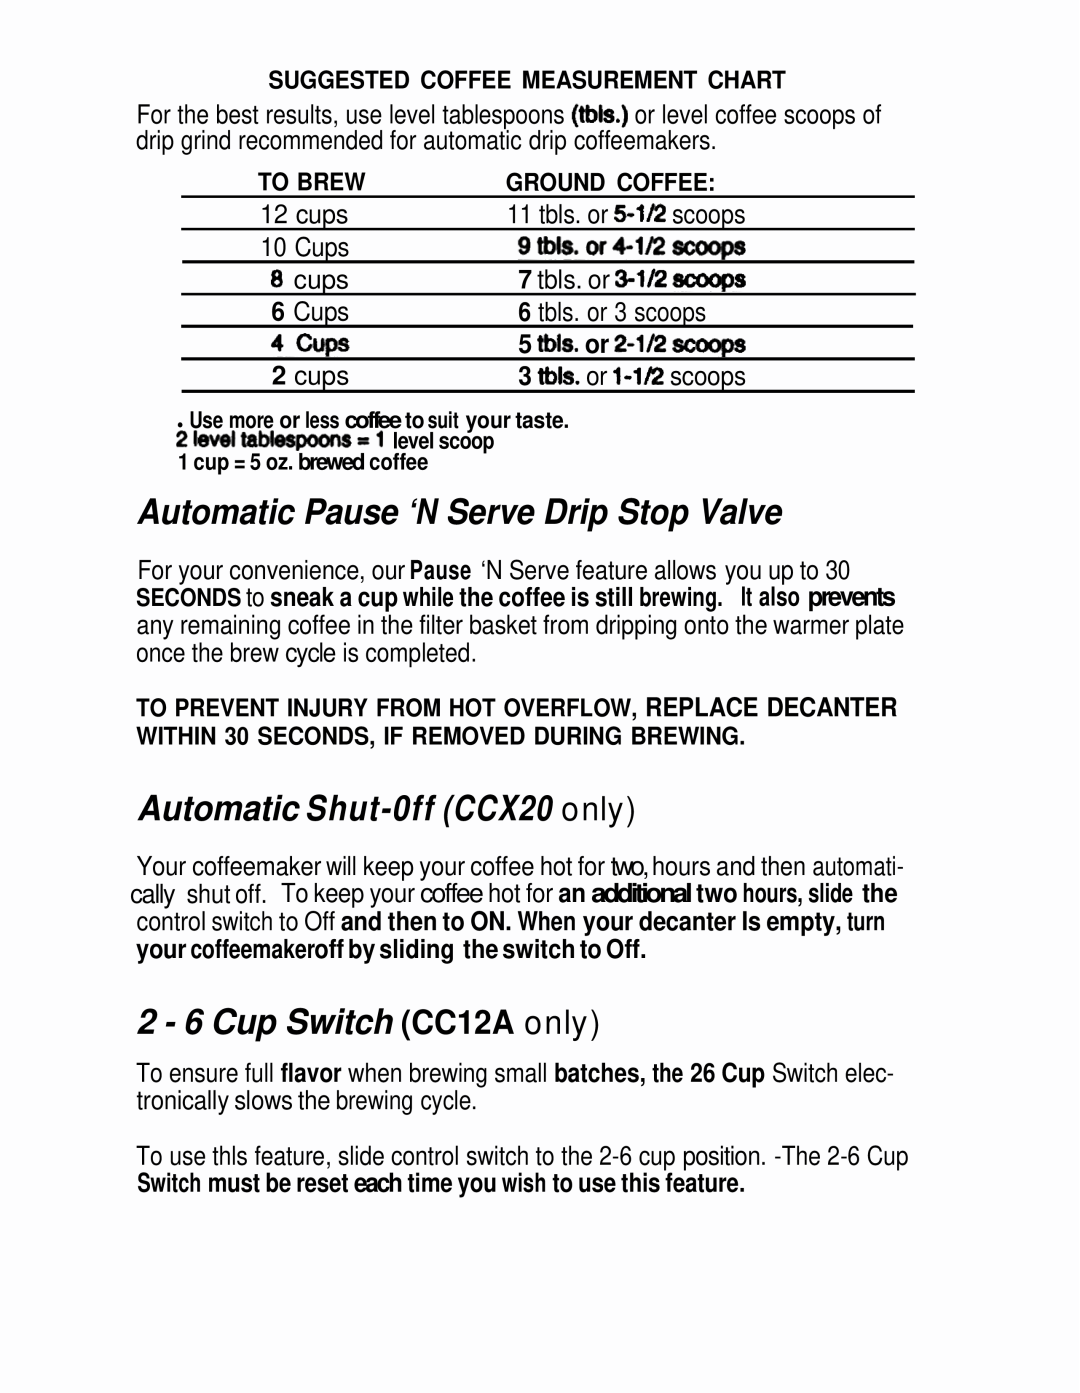 Mr. Coffee Automatic Pause ‘N Serve Drip Stop Valve, Automatic Shut-0ffCCX20 only, 2 - 6 Cup Switch CC12A only, 4cups 